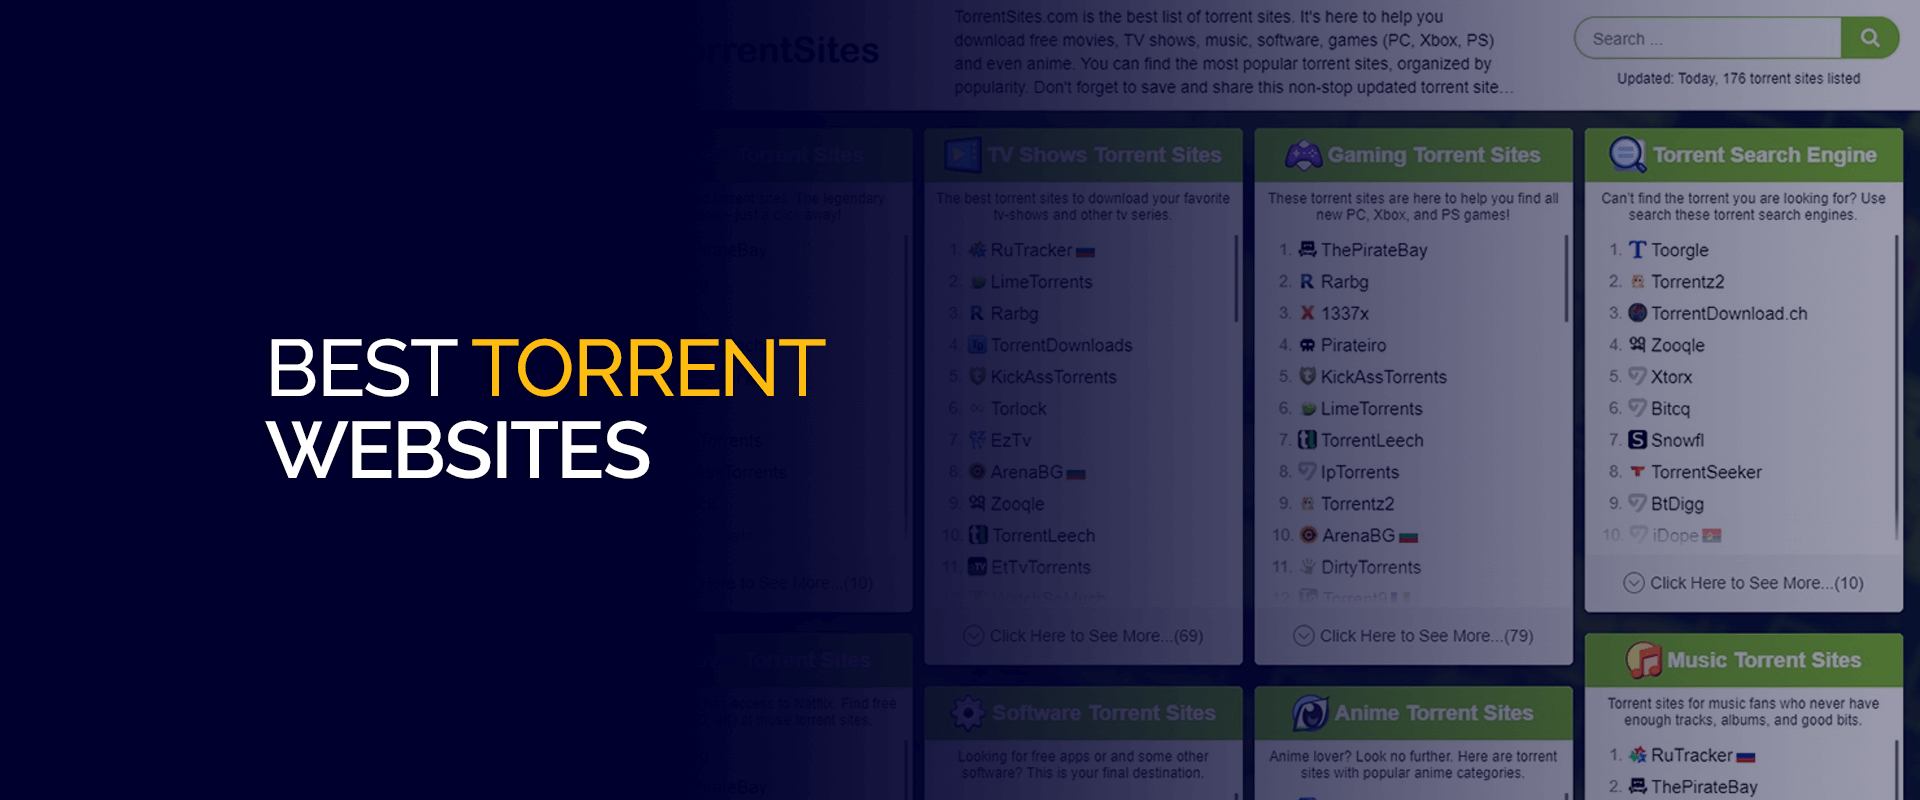 The List of the Best Torrent Sites of 2023